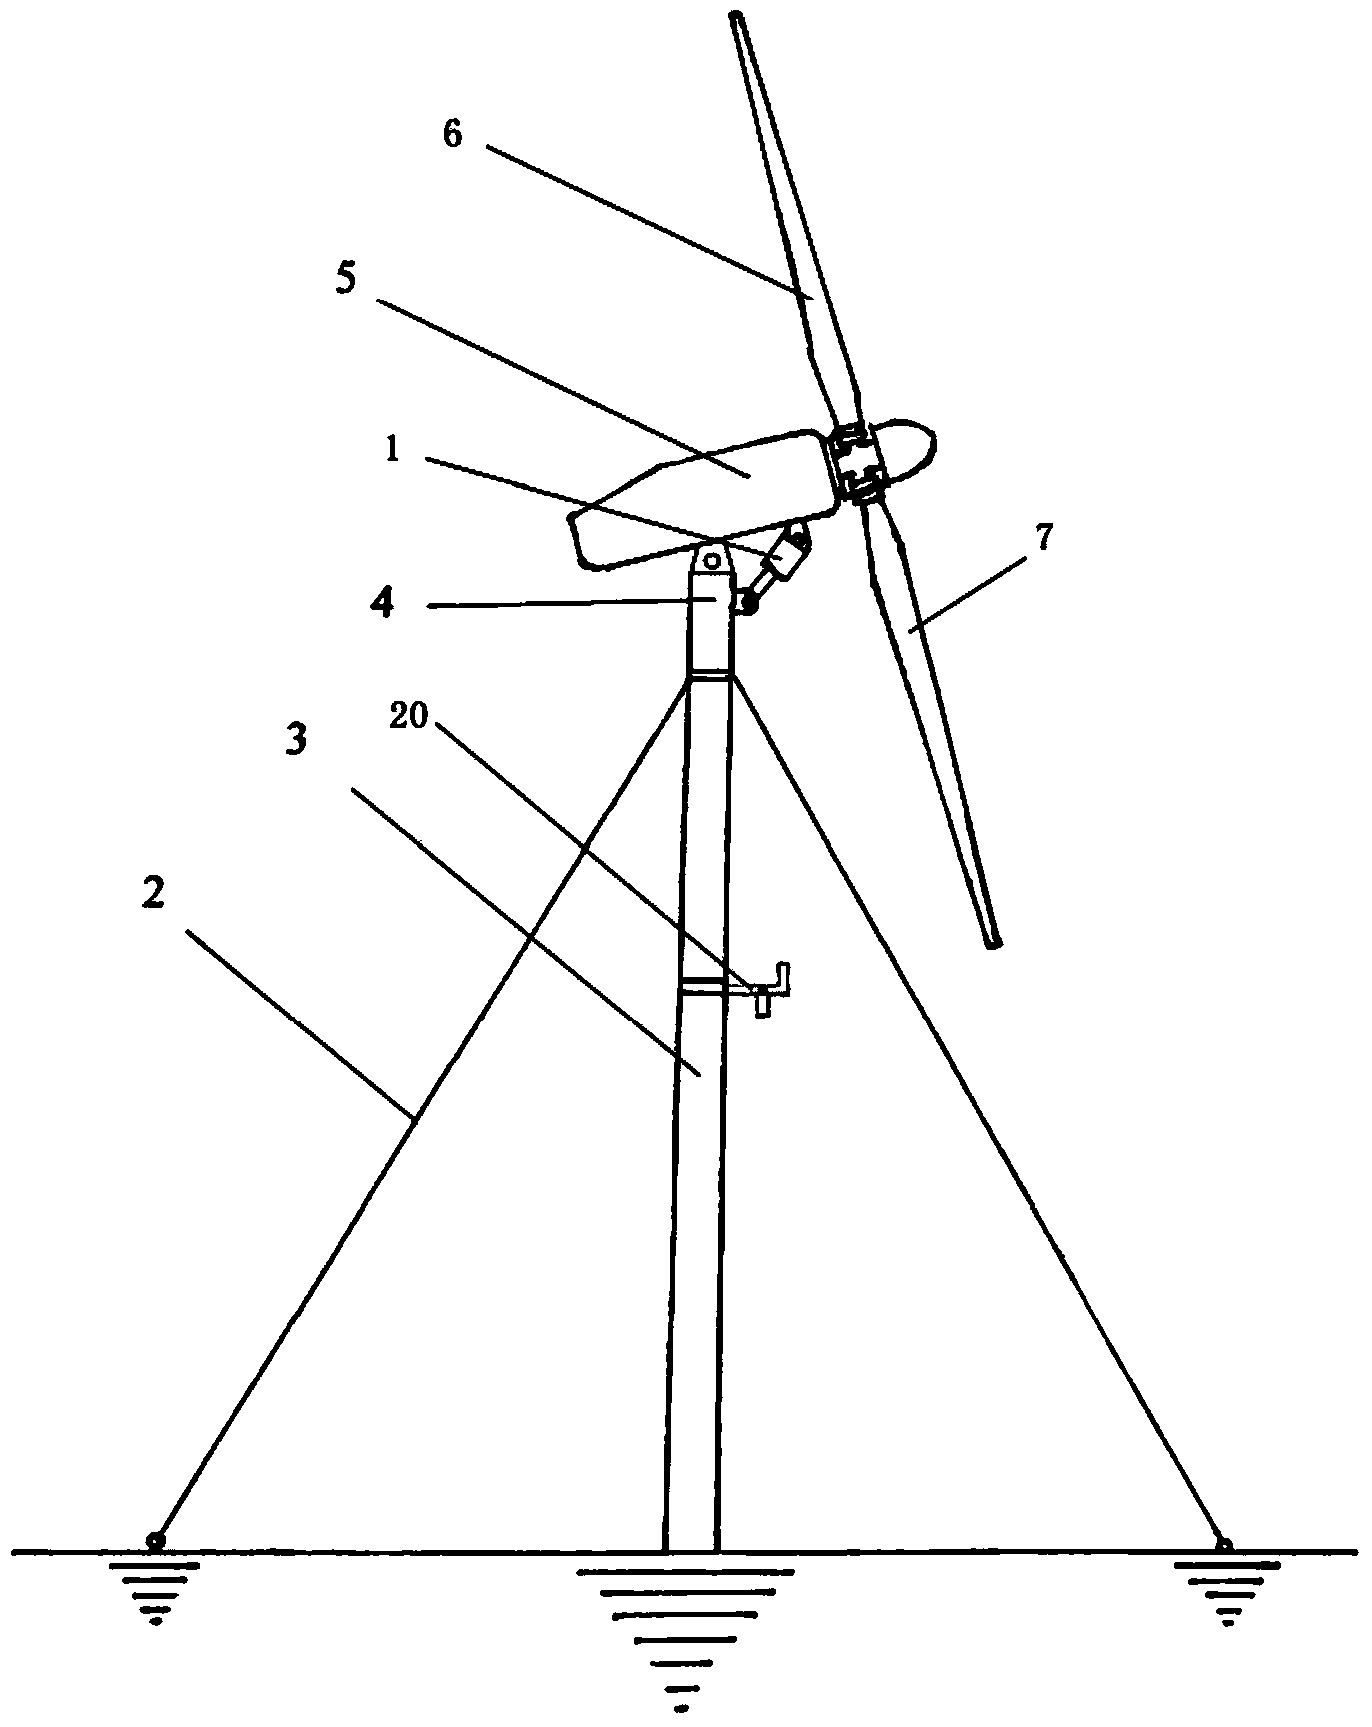 Wind power generation device with rear-mounted blades